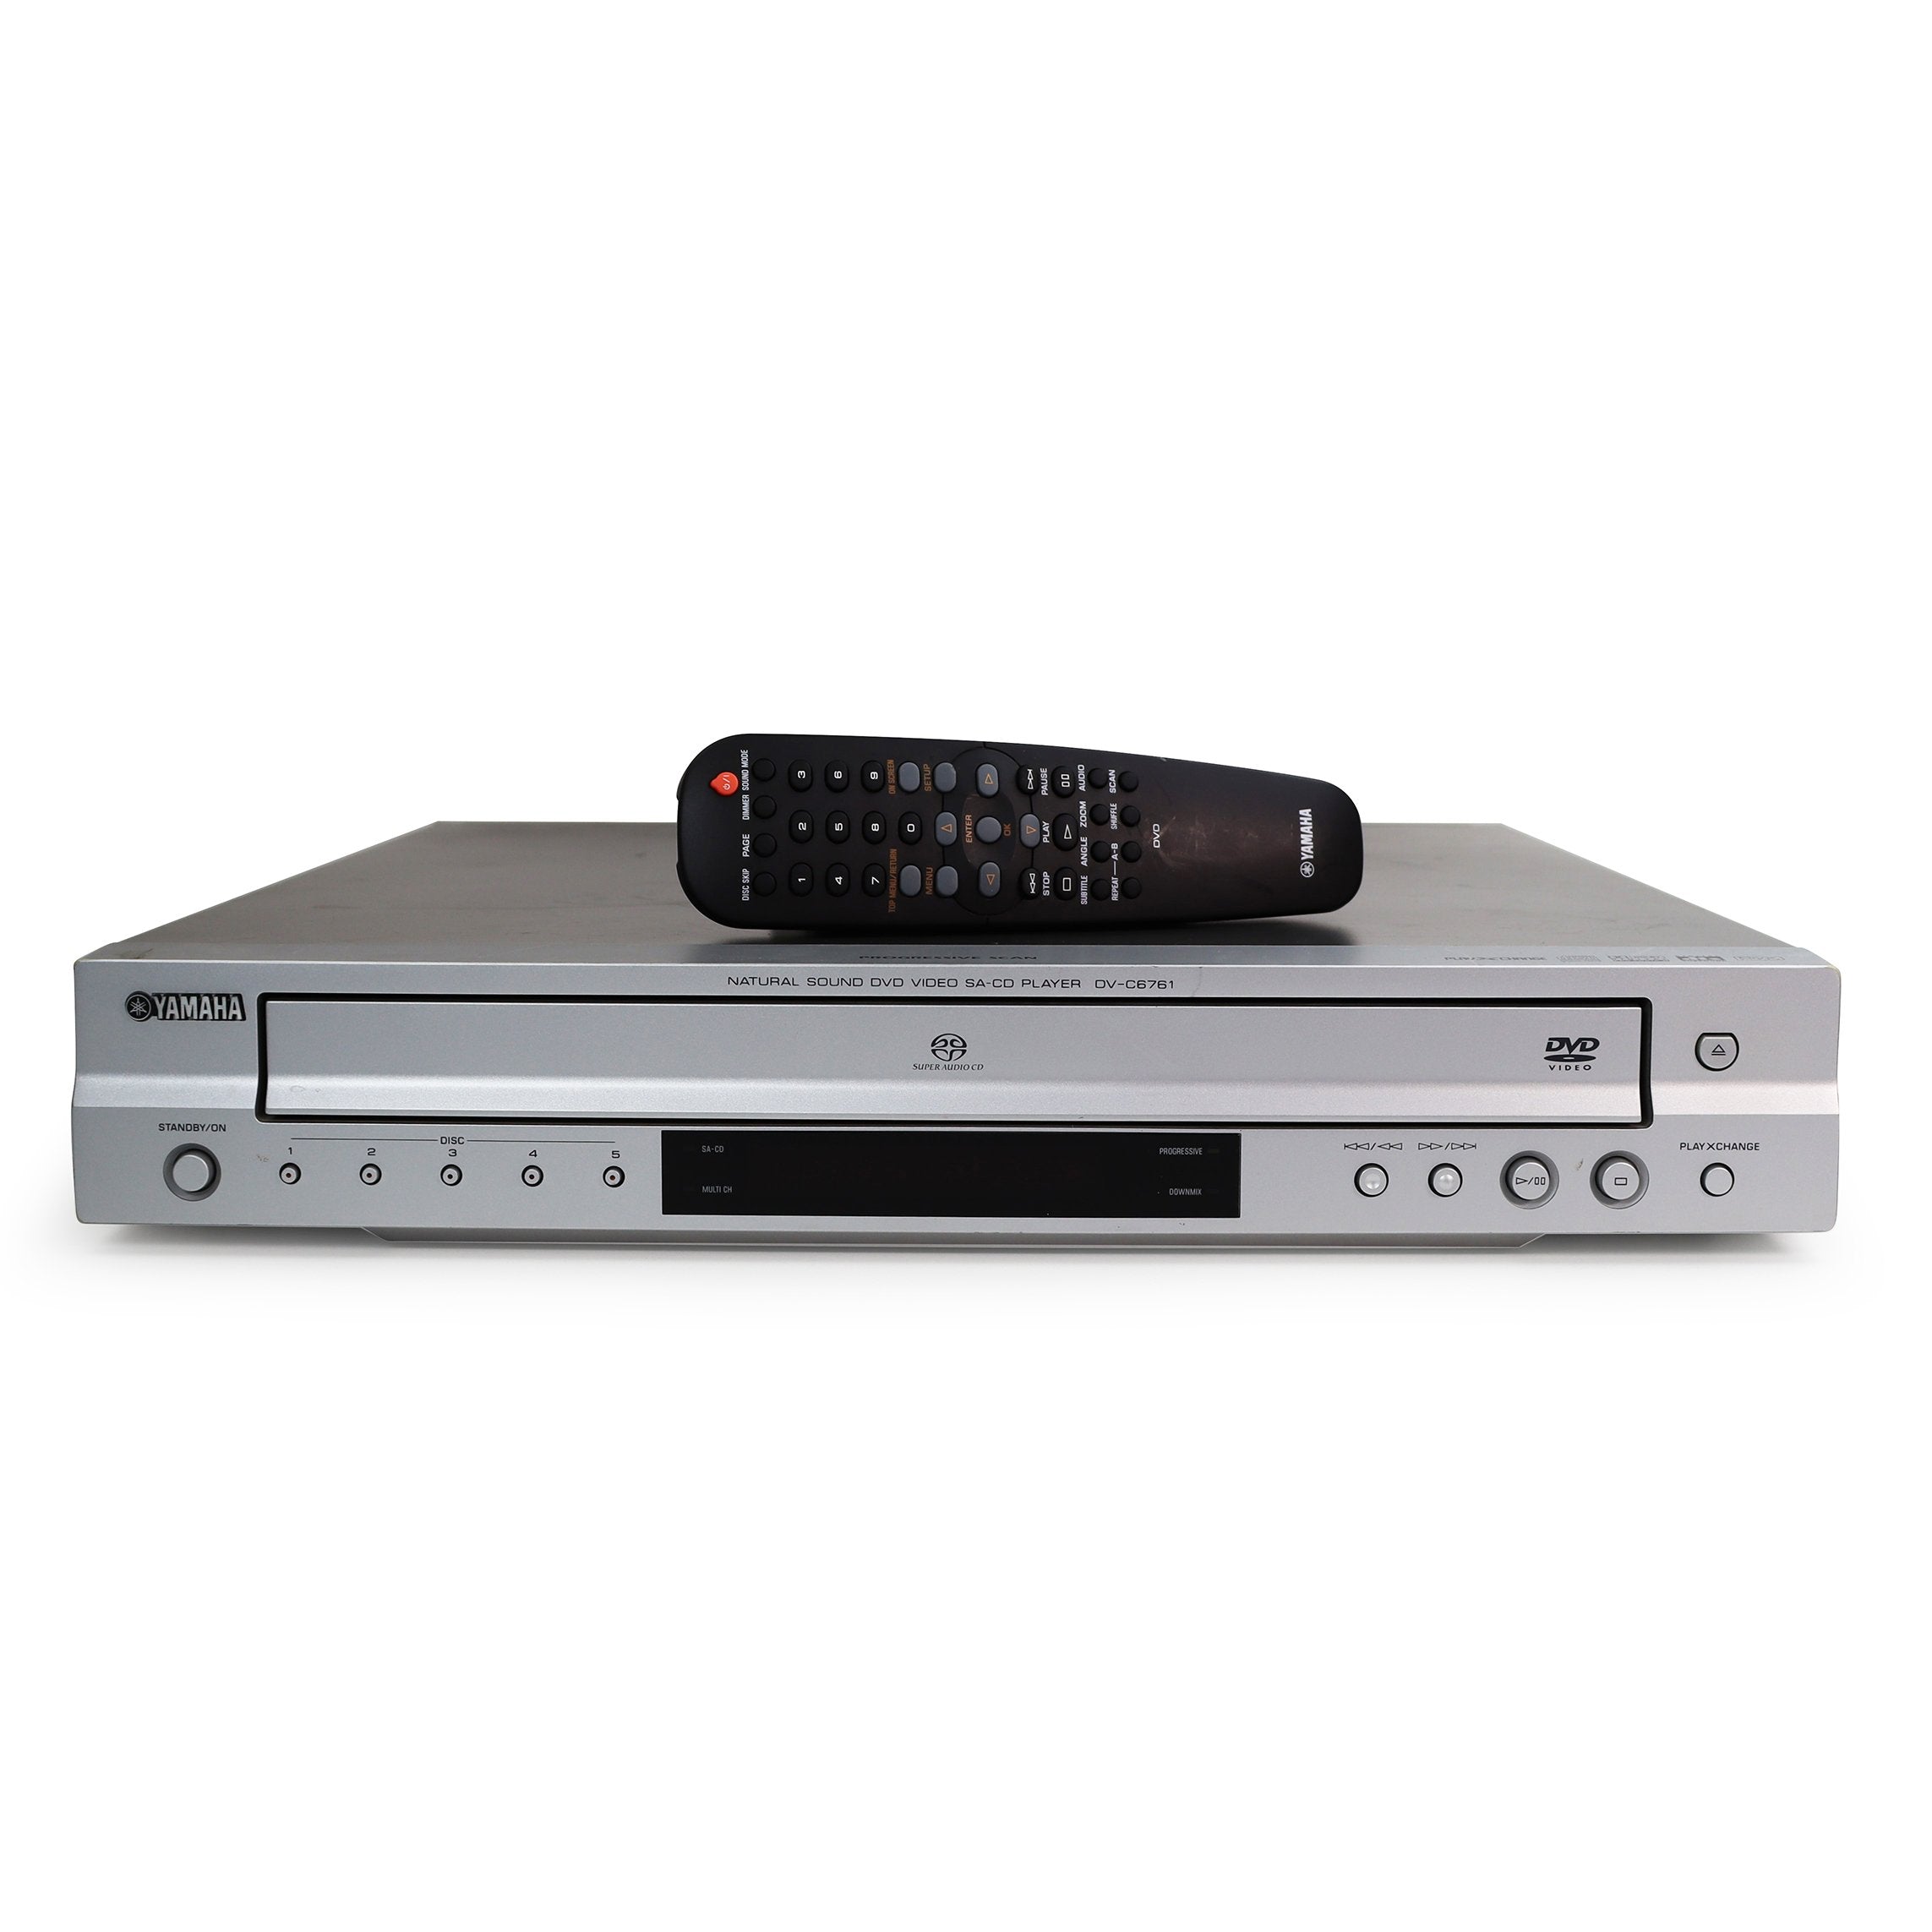 Four Reasons To Buy A Blu-Ray Player Instead Of A CD Player 